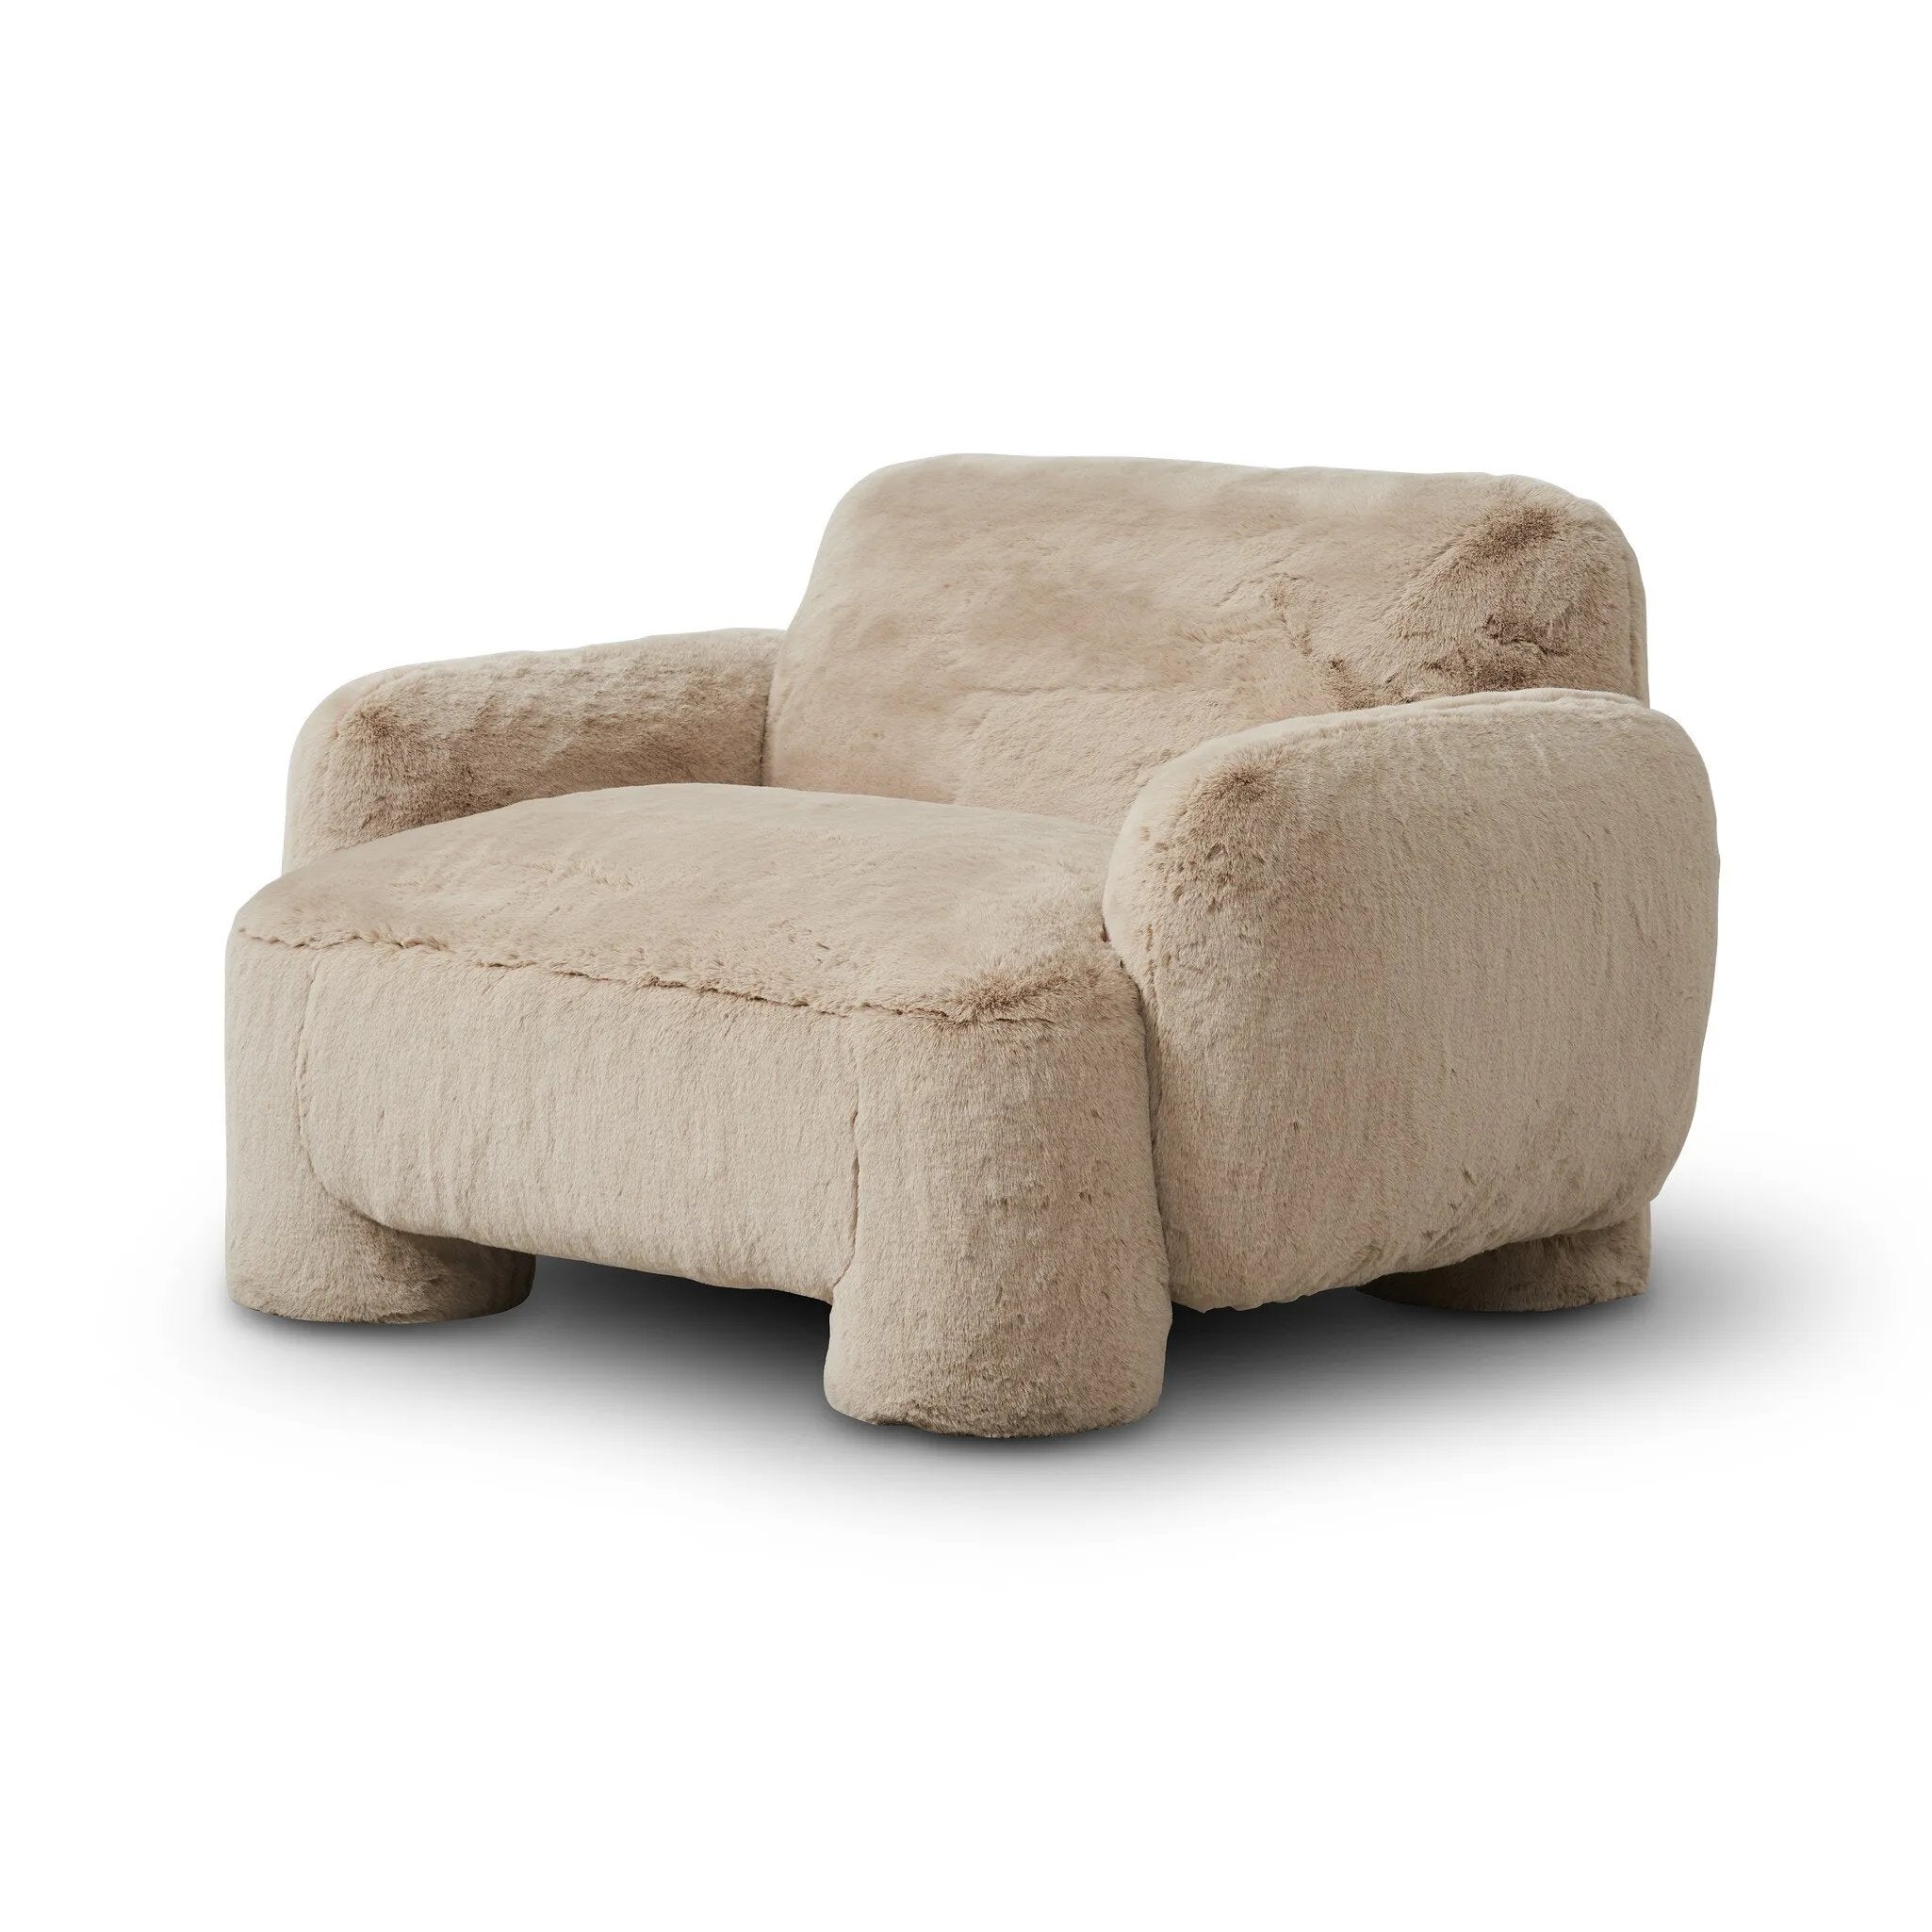 Oversized and modern, this arm chair is a statement piece whether styled alone or with an existing living room setup. The neutral faux fur covering subdues bold arms and cylindrical legs. With spring suspension in the seat cushion and webbed suspension in the back, the piece is designed with durability and comfort in mind.Collection: Carnegi Amethyst Home provides interior design, new home construction design consulting, vintage area rugs, and lighting in the Charlotte metro area.